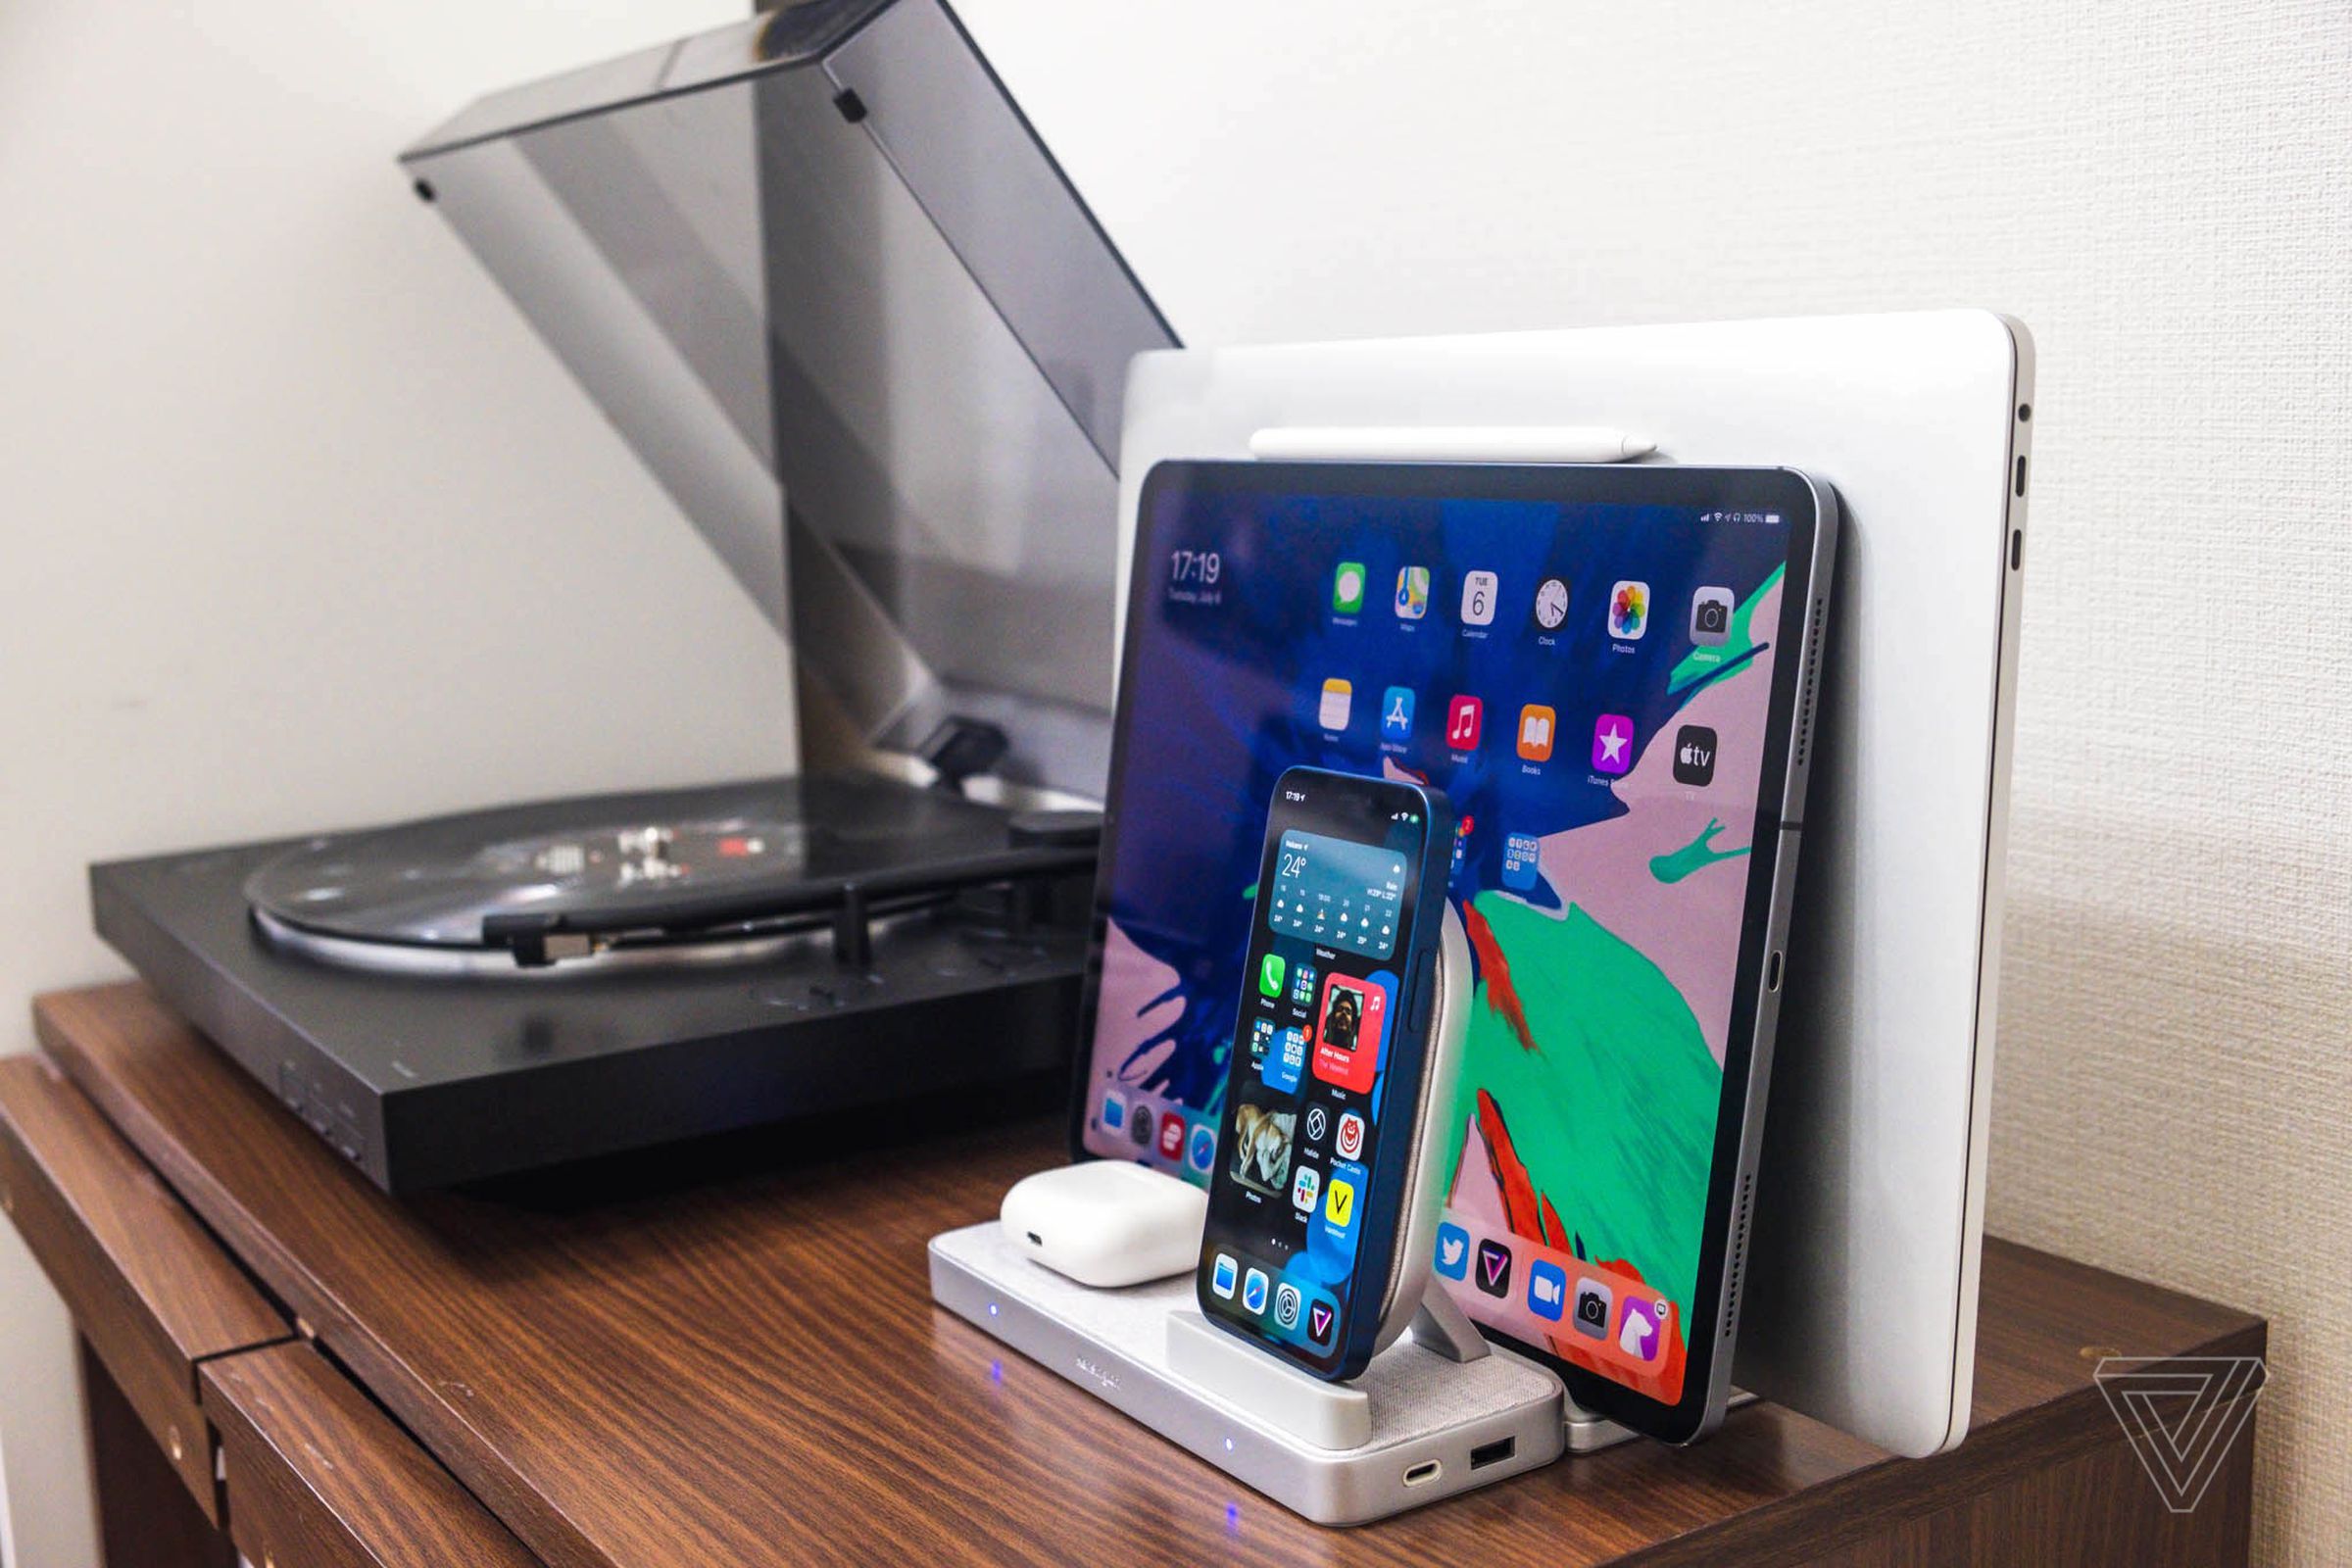 The StudioCaddy has USB-A and USB-C charging ports on the side.